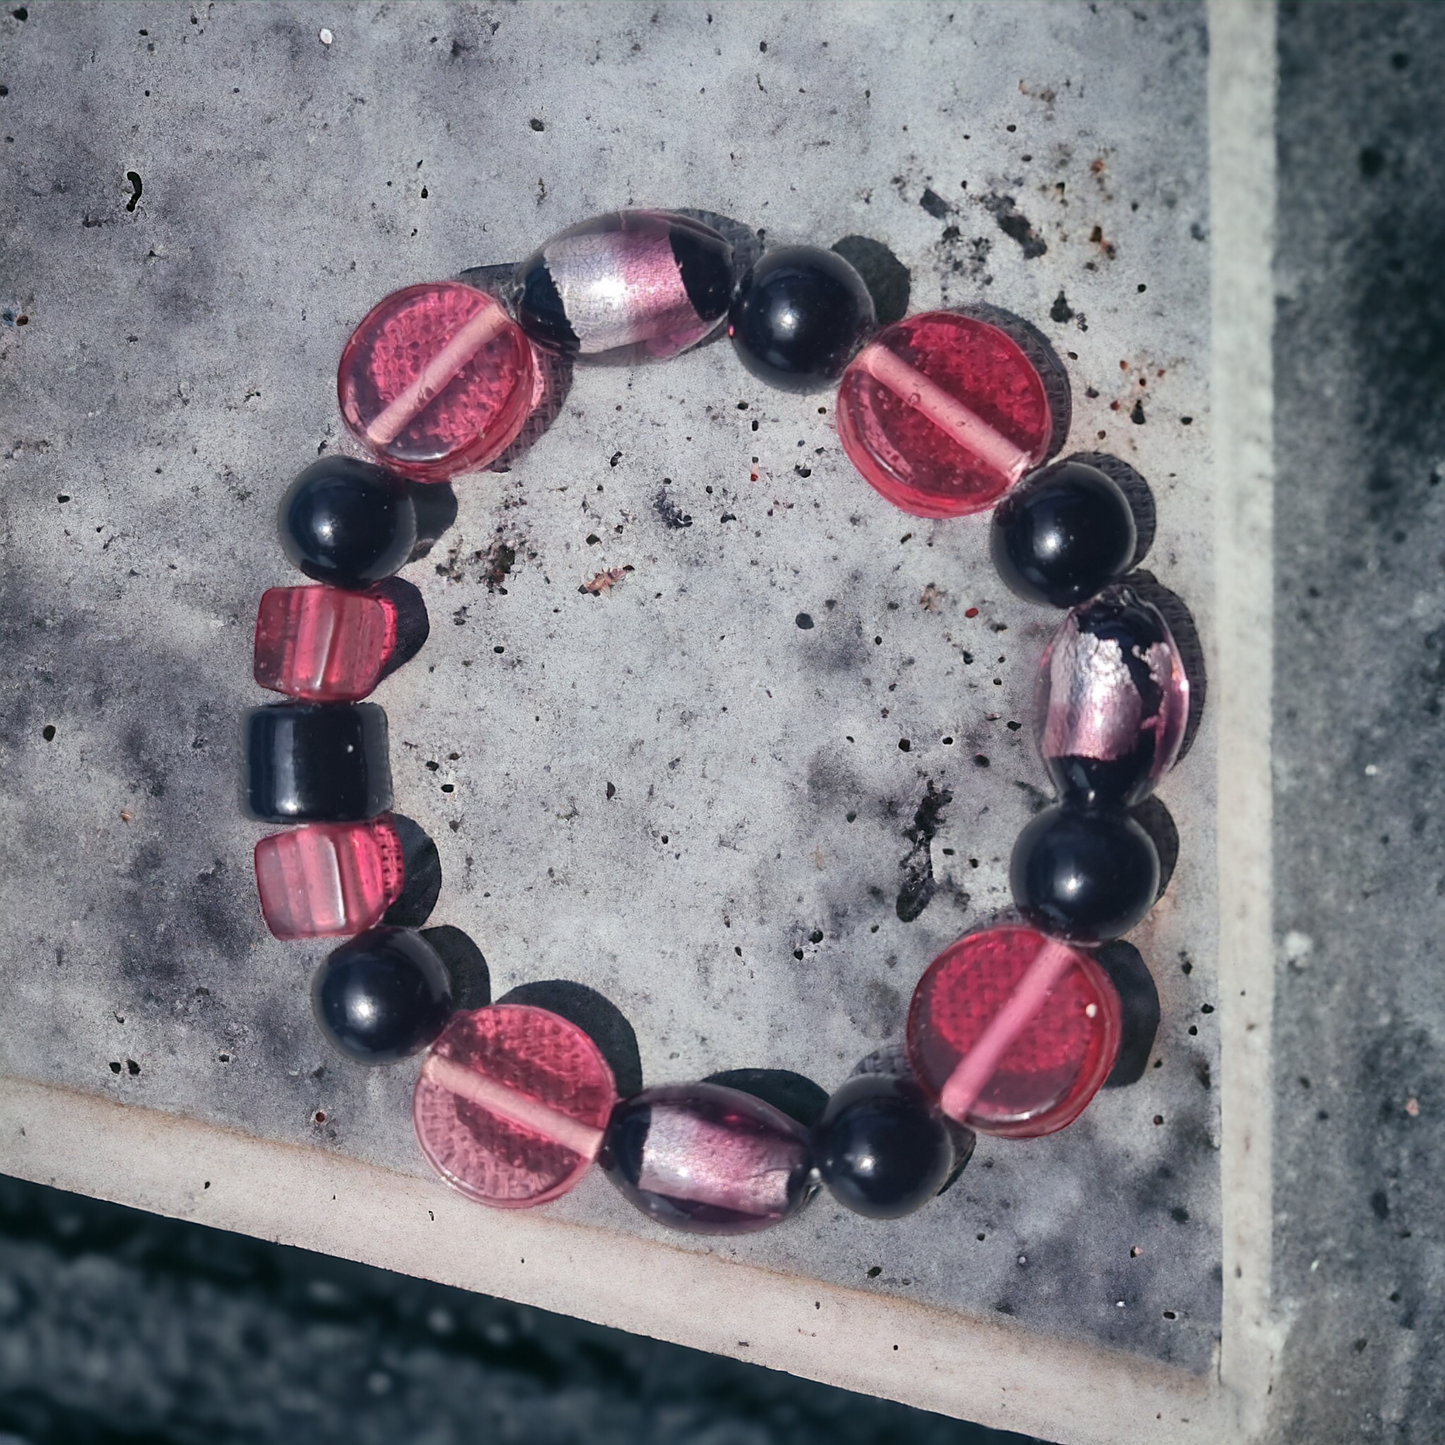 Black Onyx with a raspberry touch